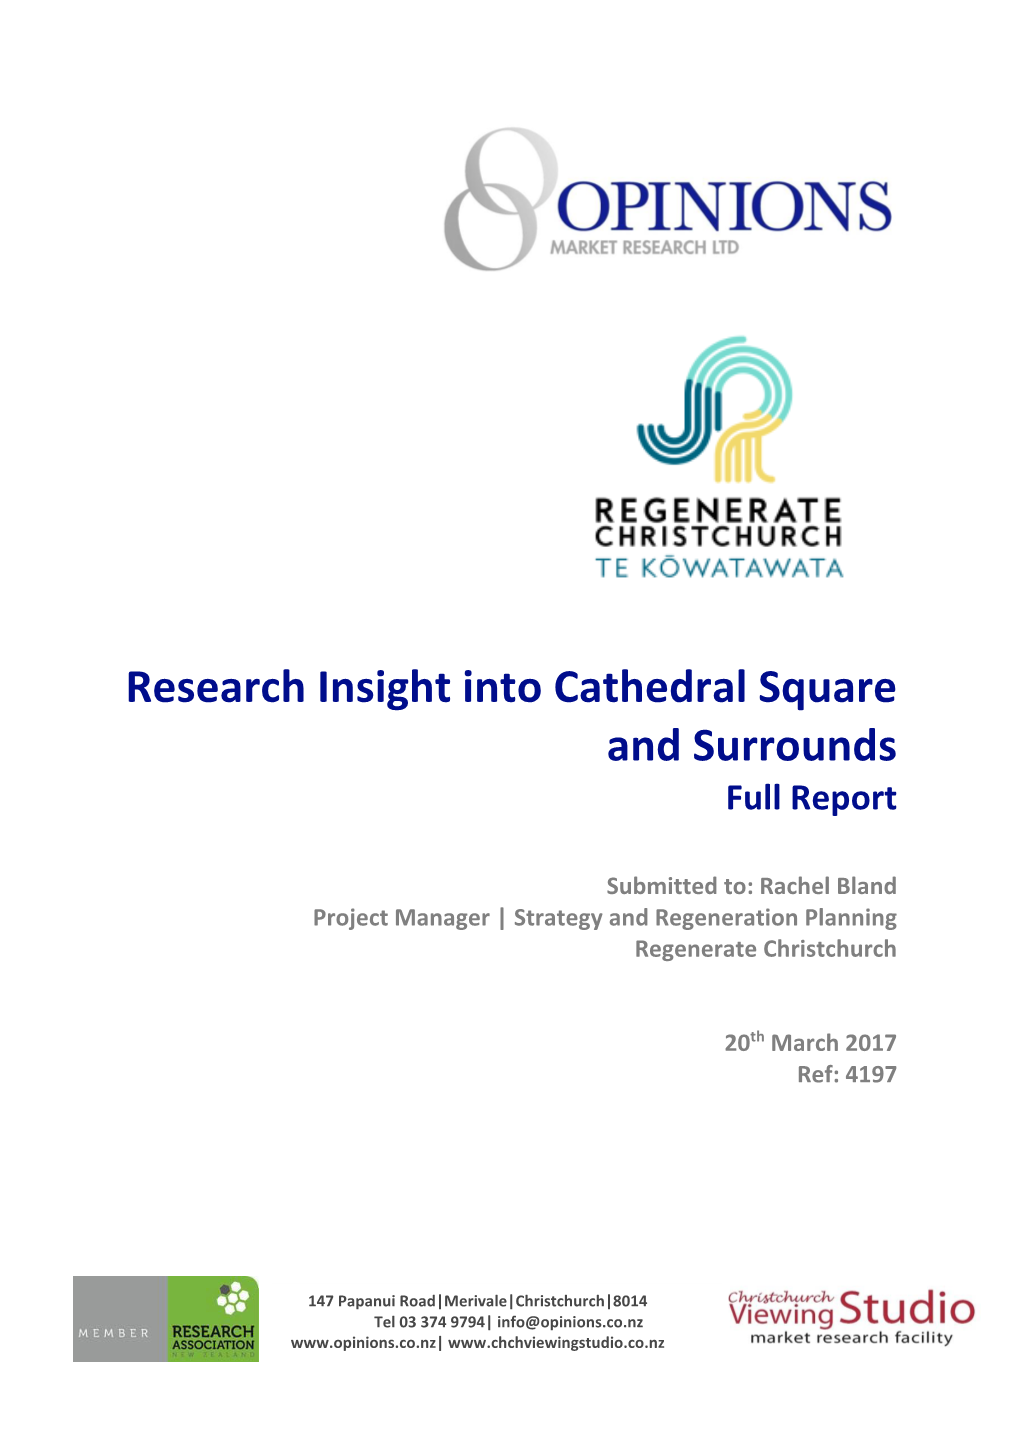 Research Insight Into Cathedral Square and Surrounds Full Report